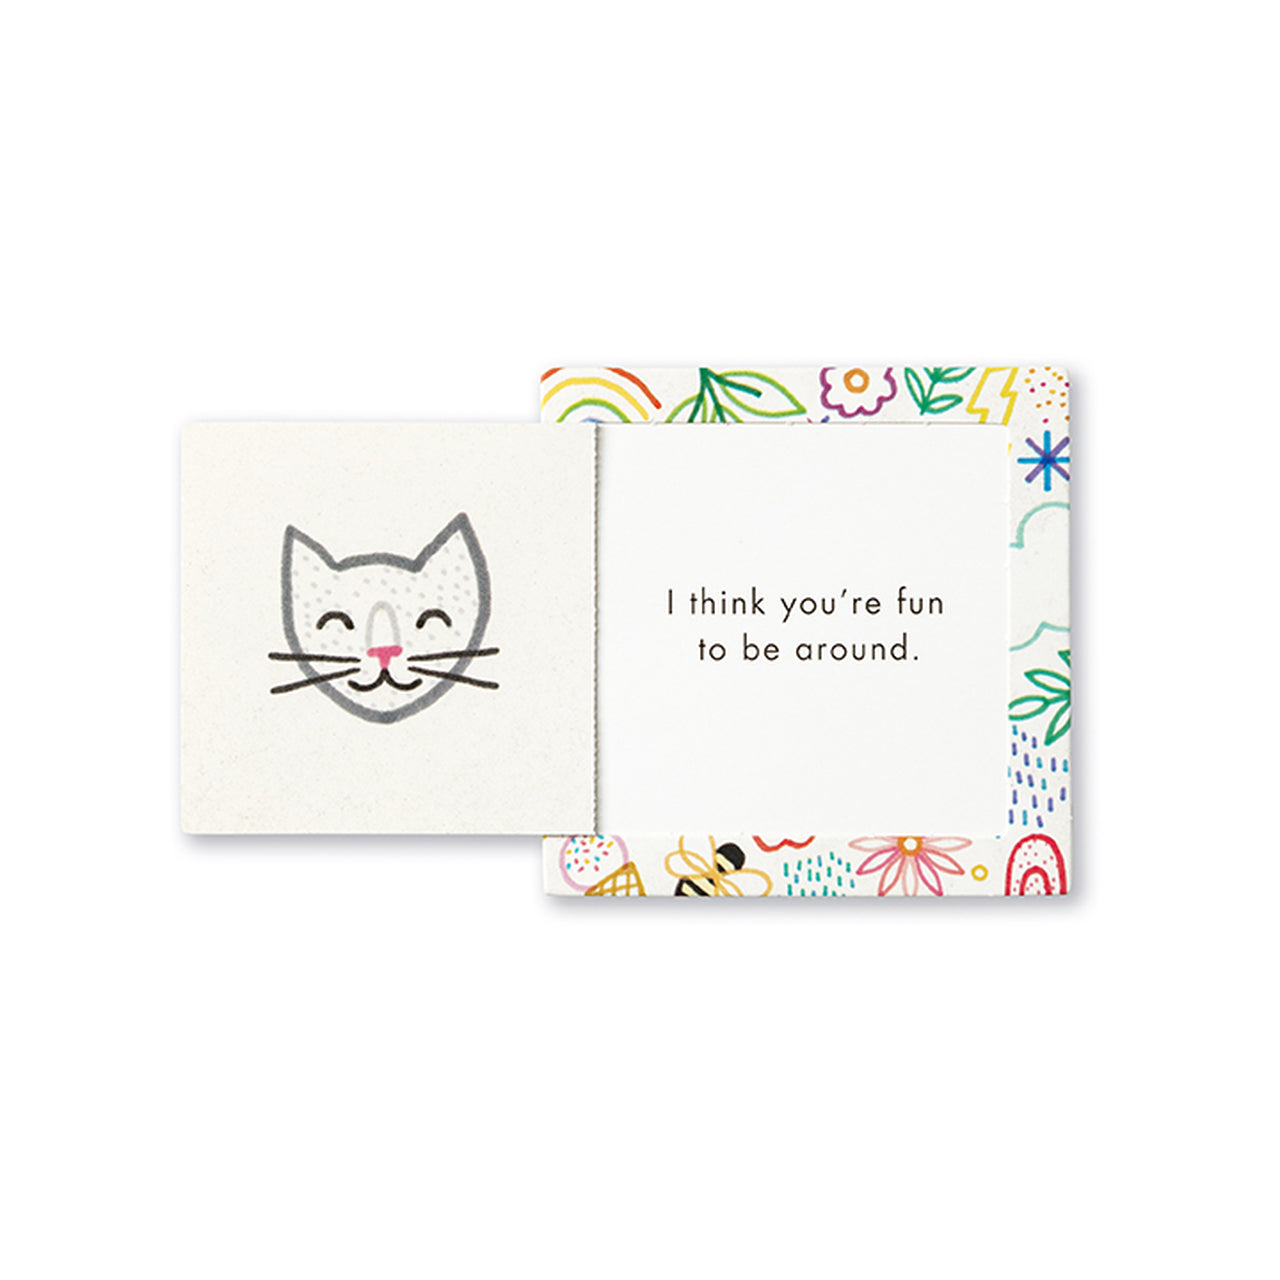 Thoughtfulls for Kids Pop-Open Cards - You're Amazing Cards Compendium 